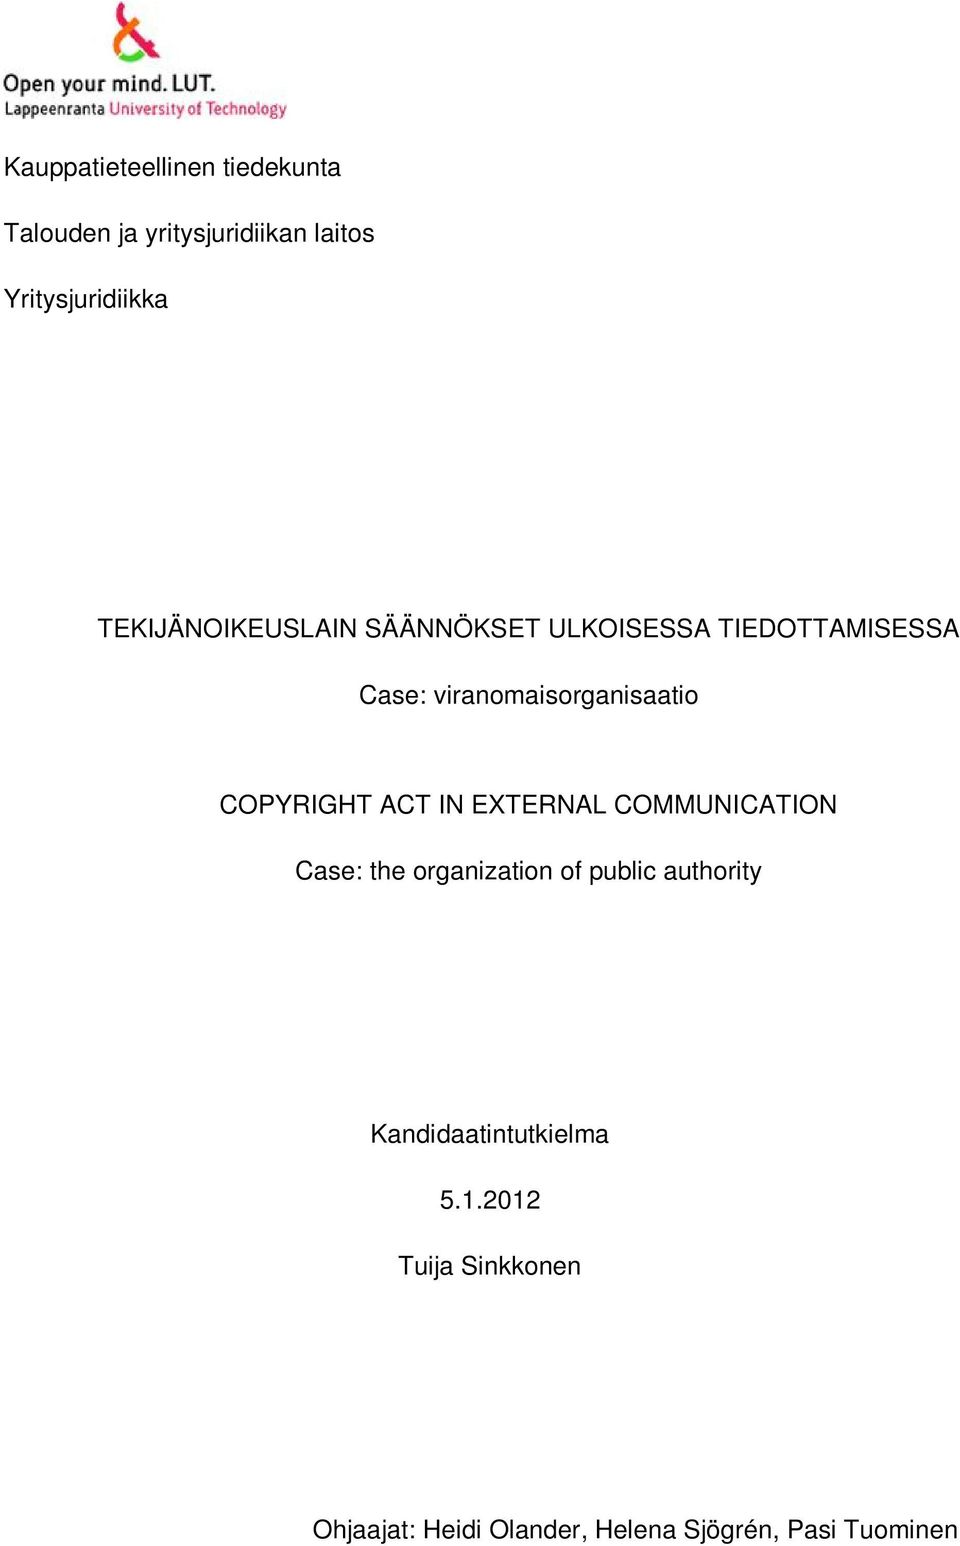 COPYRIGHT ACT IN EXTERNAL COMMUNICATION Case: the organization of public authority